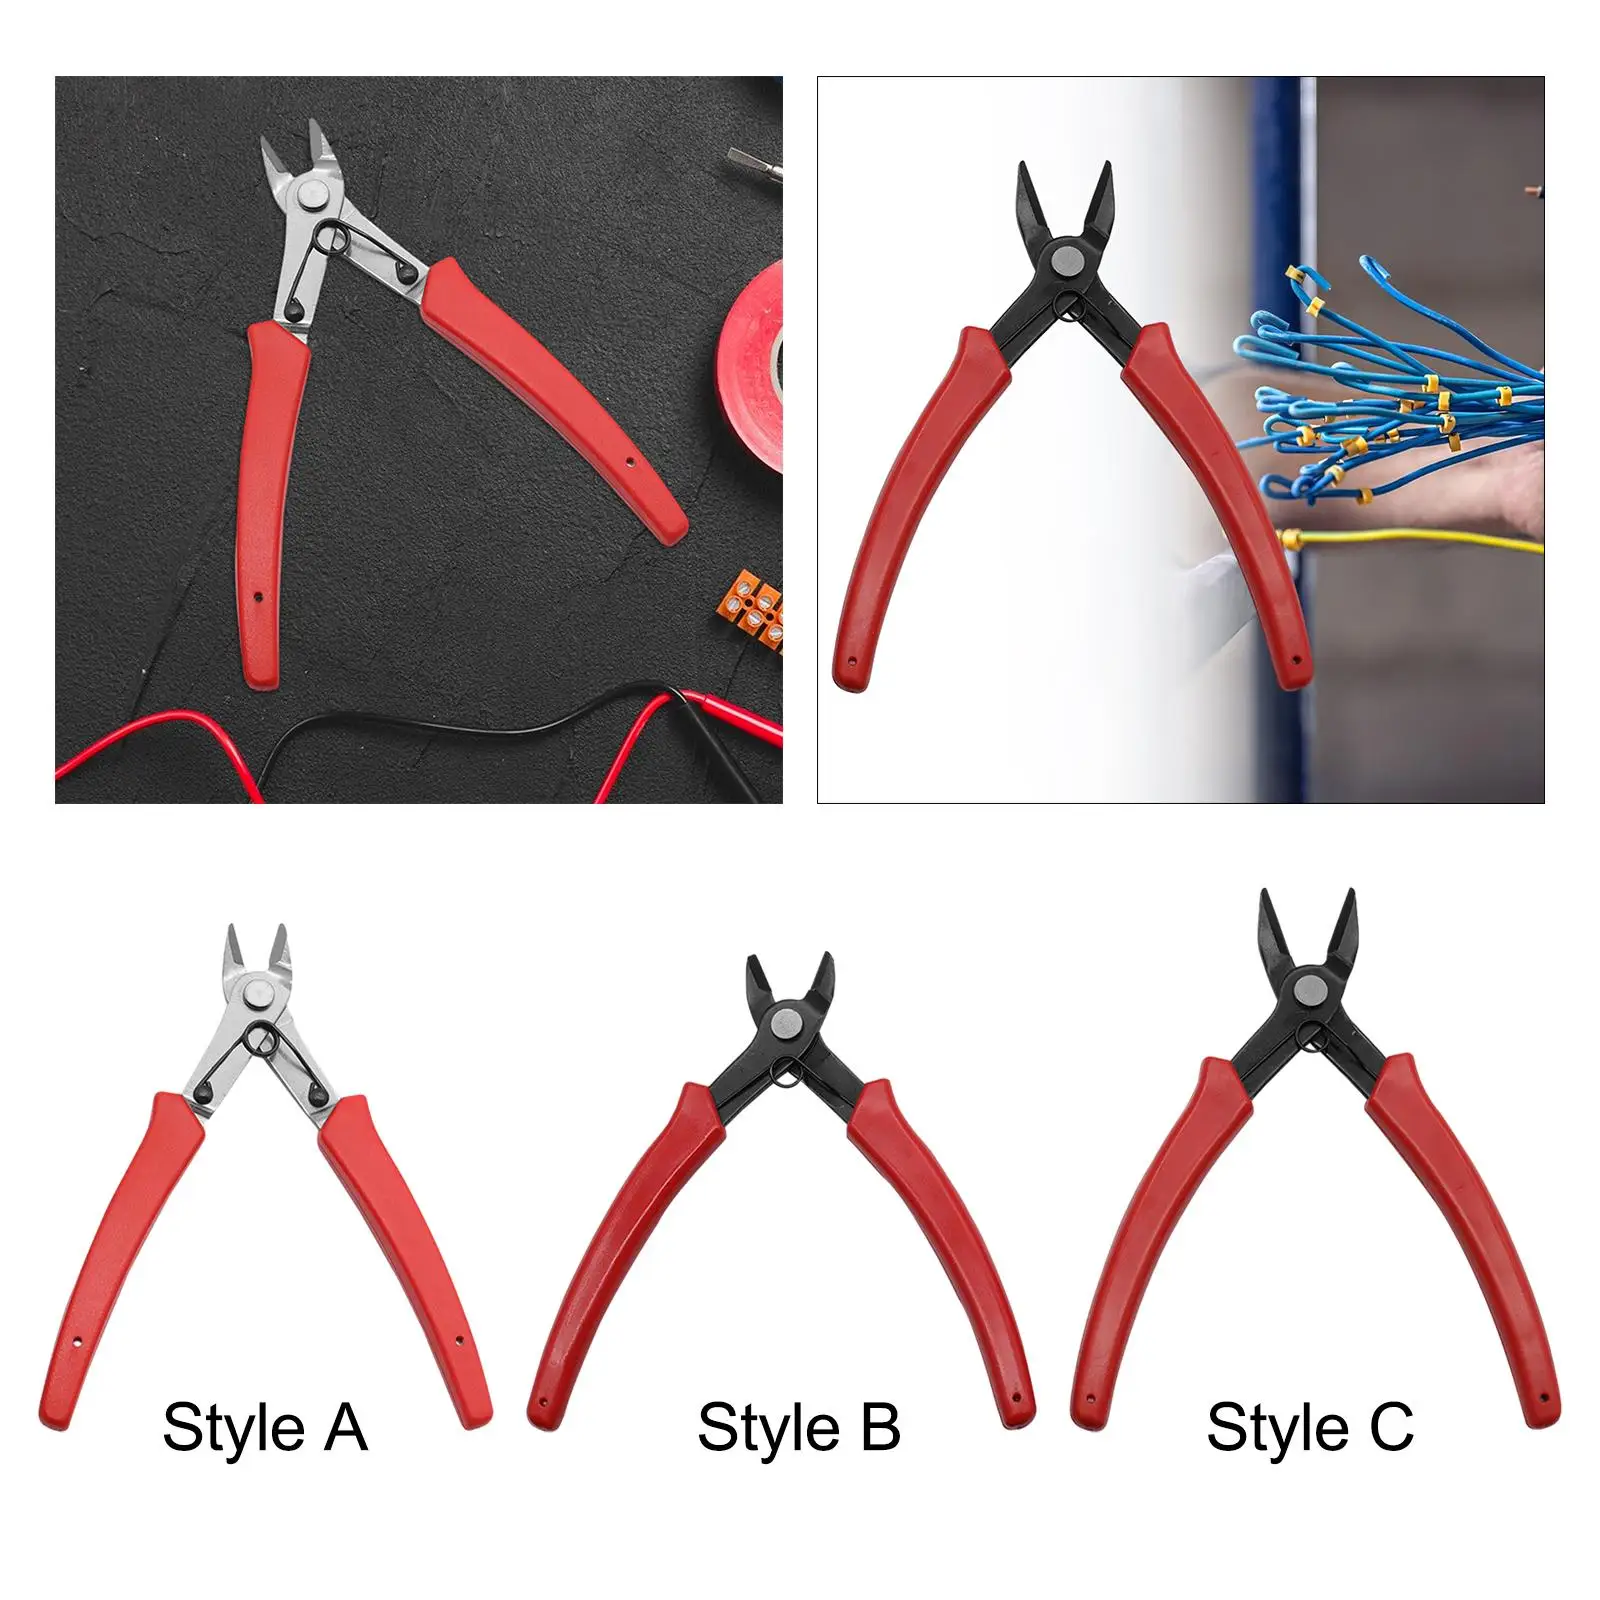 Diagonal Cutters Multipurpose Multifunctional Scissors Angled Head Wire Cutters for Cutting Heating Wire Electrician Work